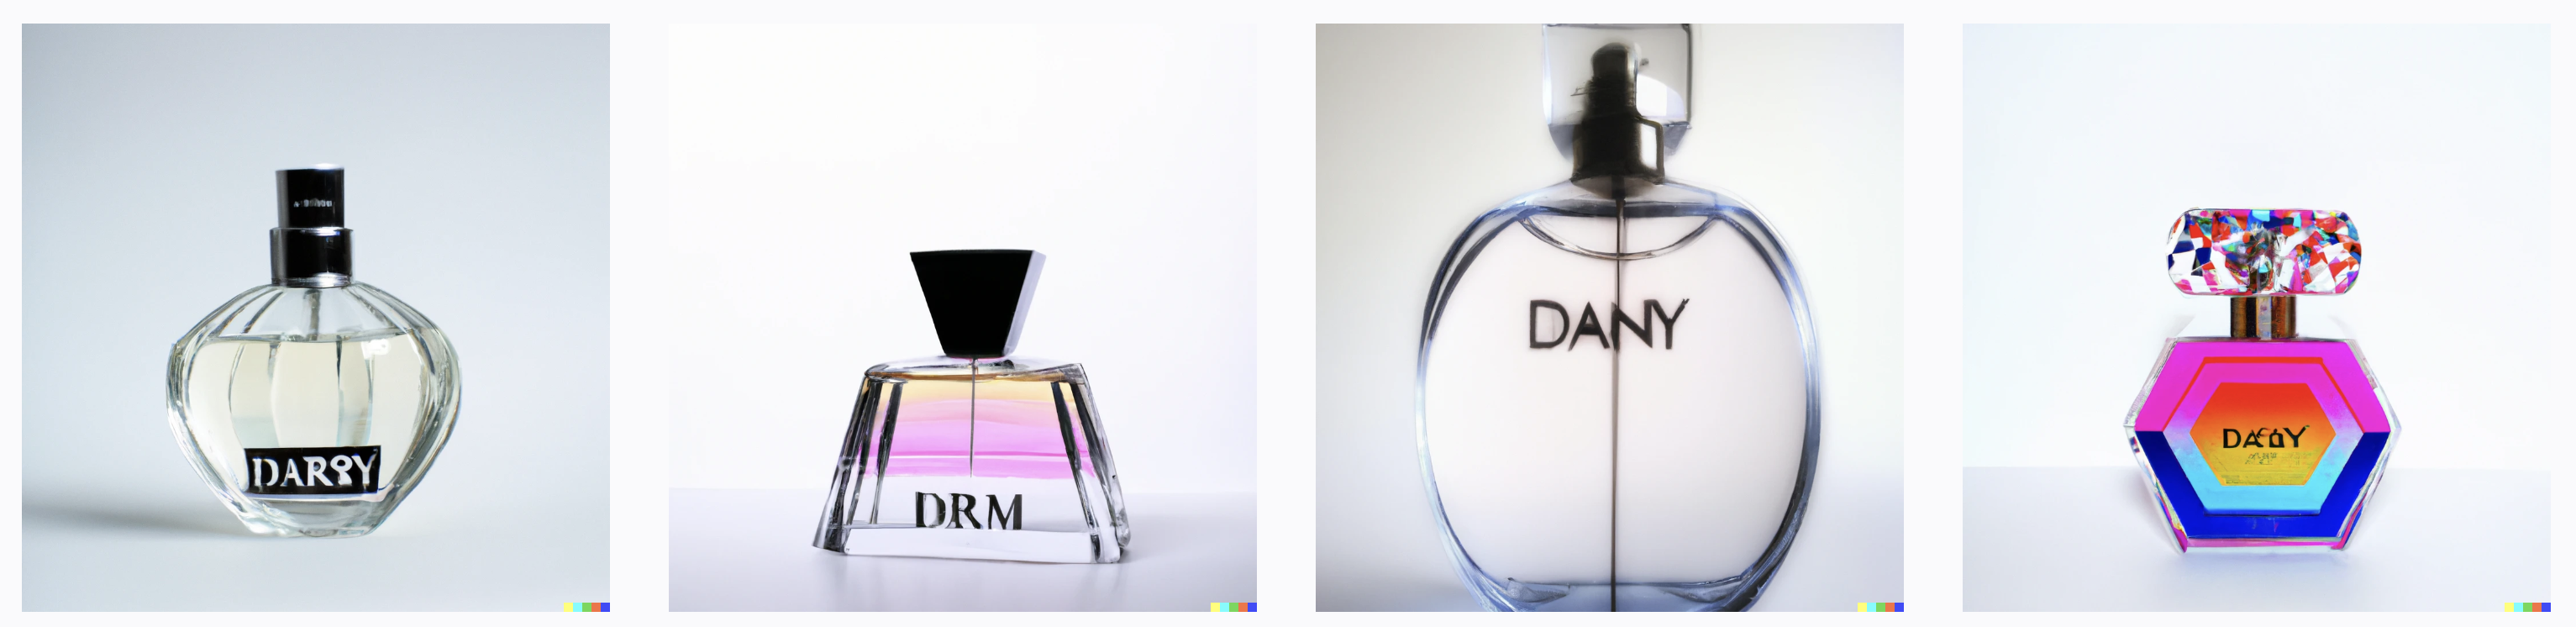 Fragrance bottles made by an AI